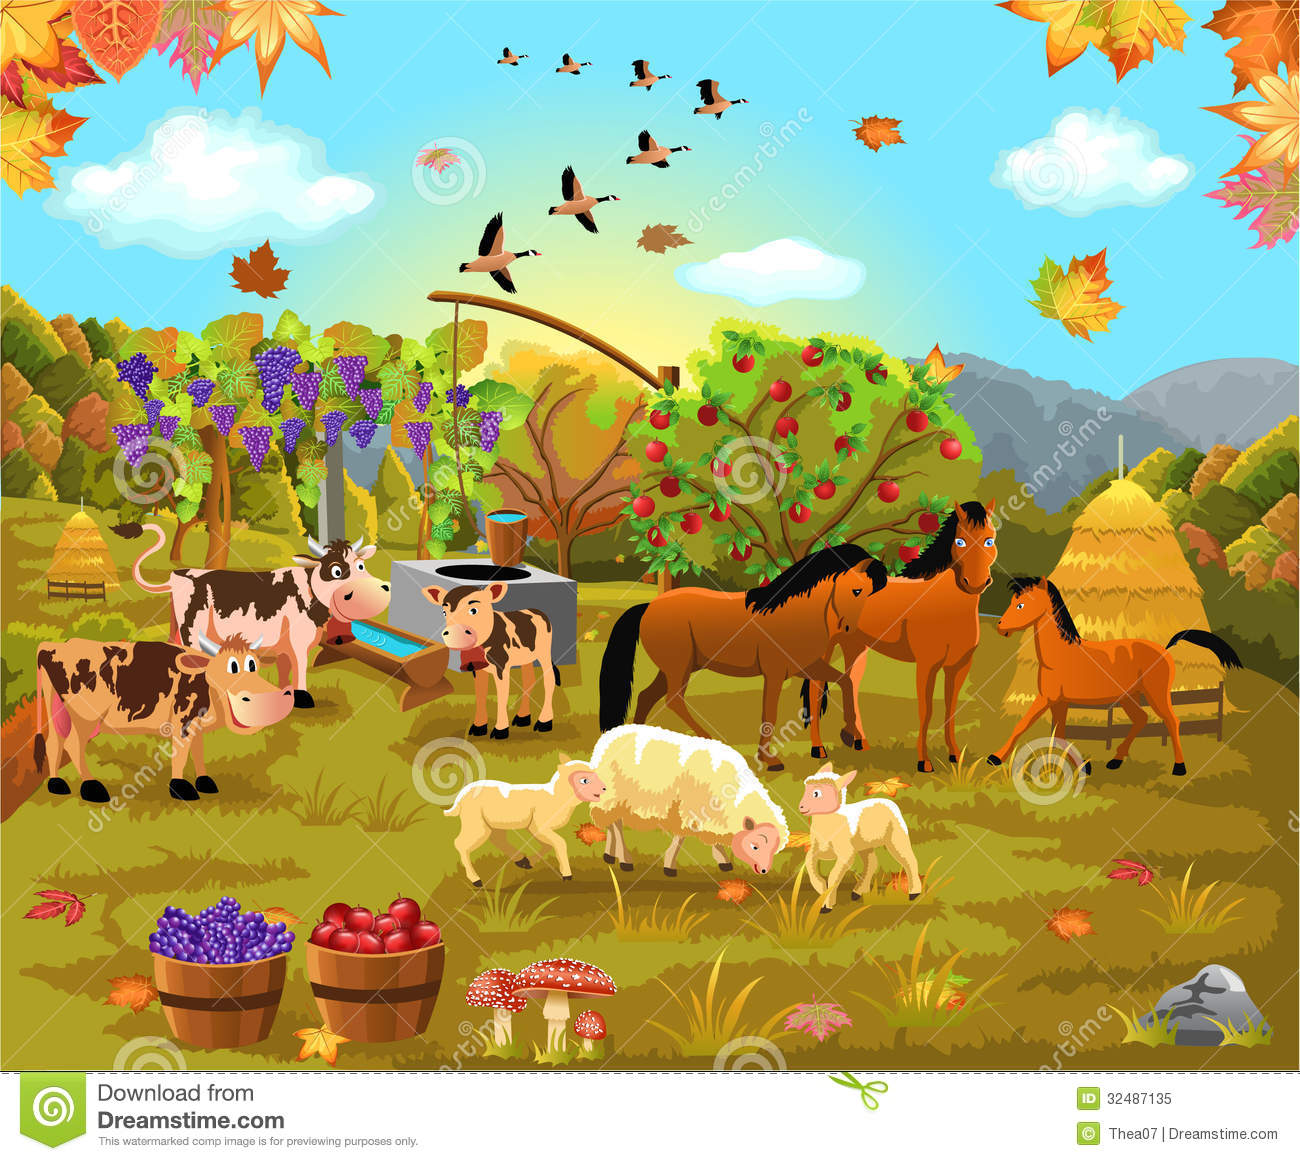 Vector Illustration Of Autumn Scene With Animals And Crop In The Field